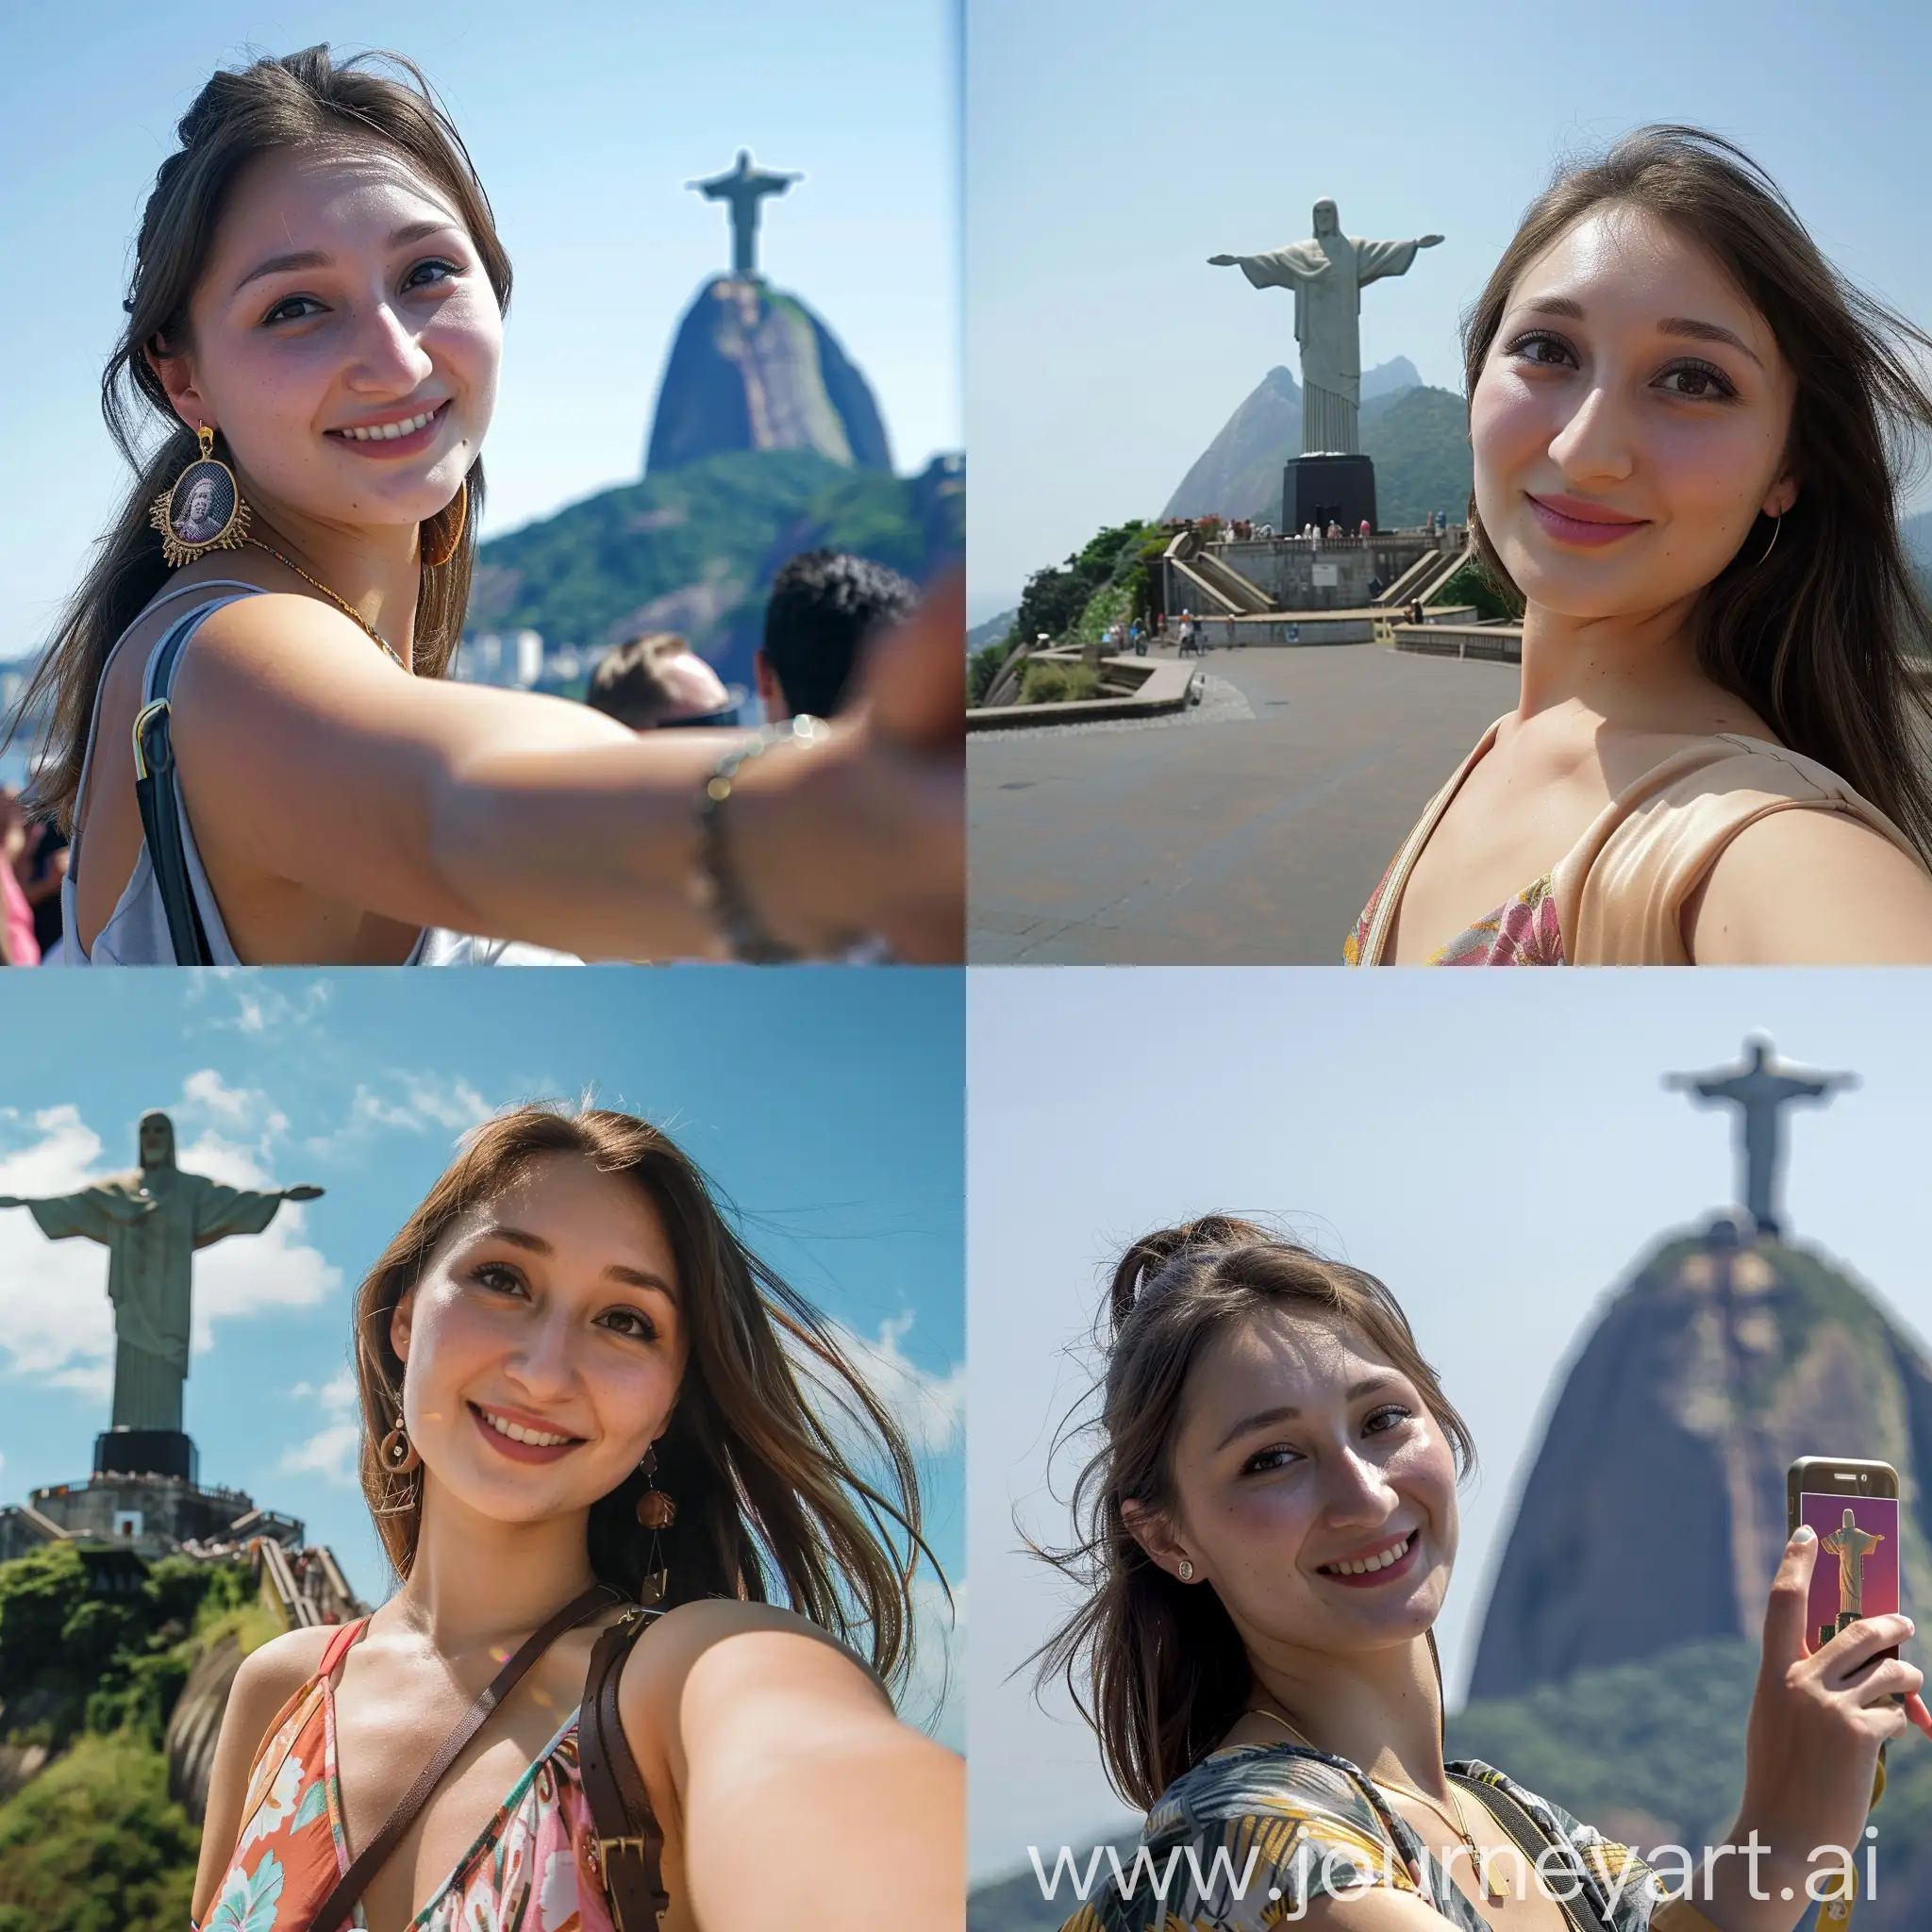 Young-Woman-Capturing-Selfie-with-Christ-the-Redeemer-in-Rio-de-Janeiro